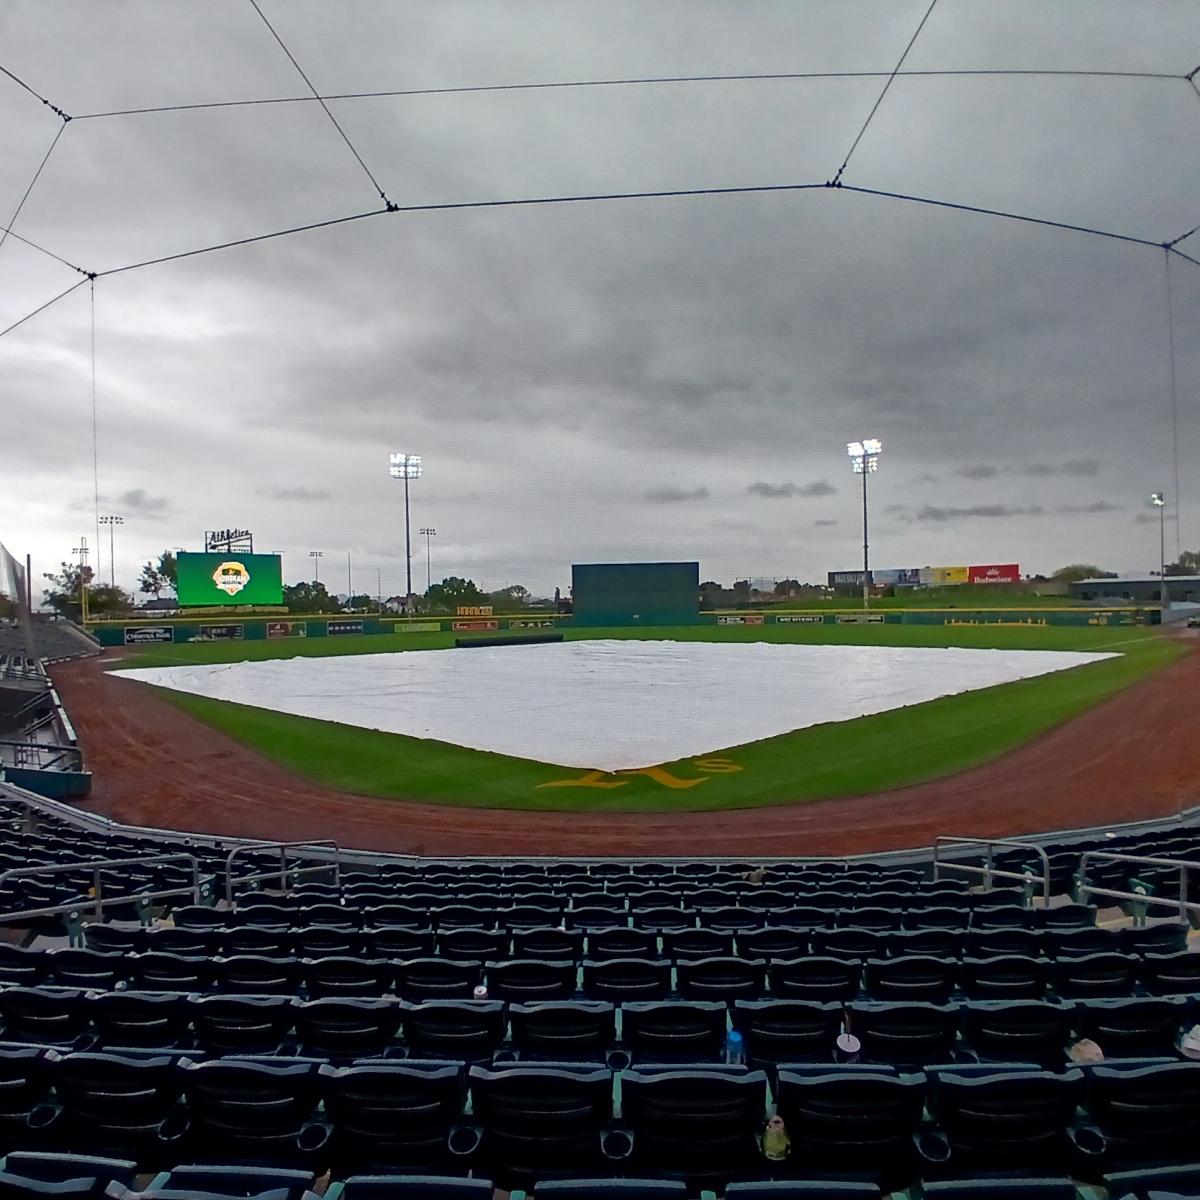 My Last Day In Phoenix – The Doubleheader Rainout And The Waiting Game